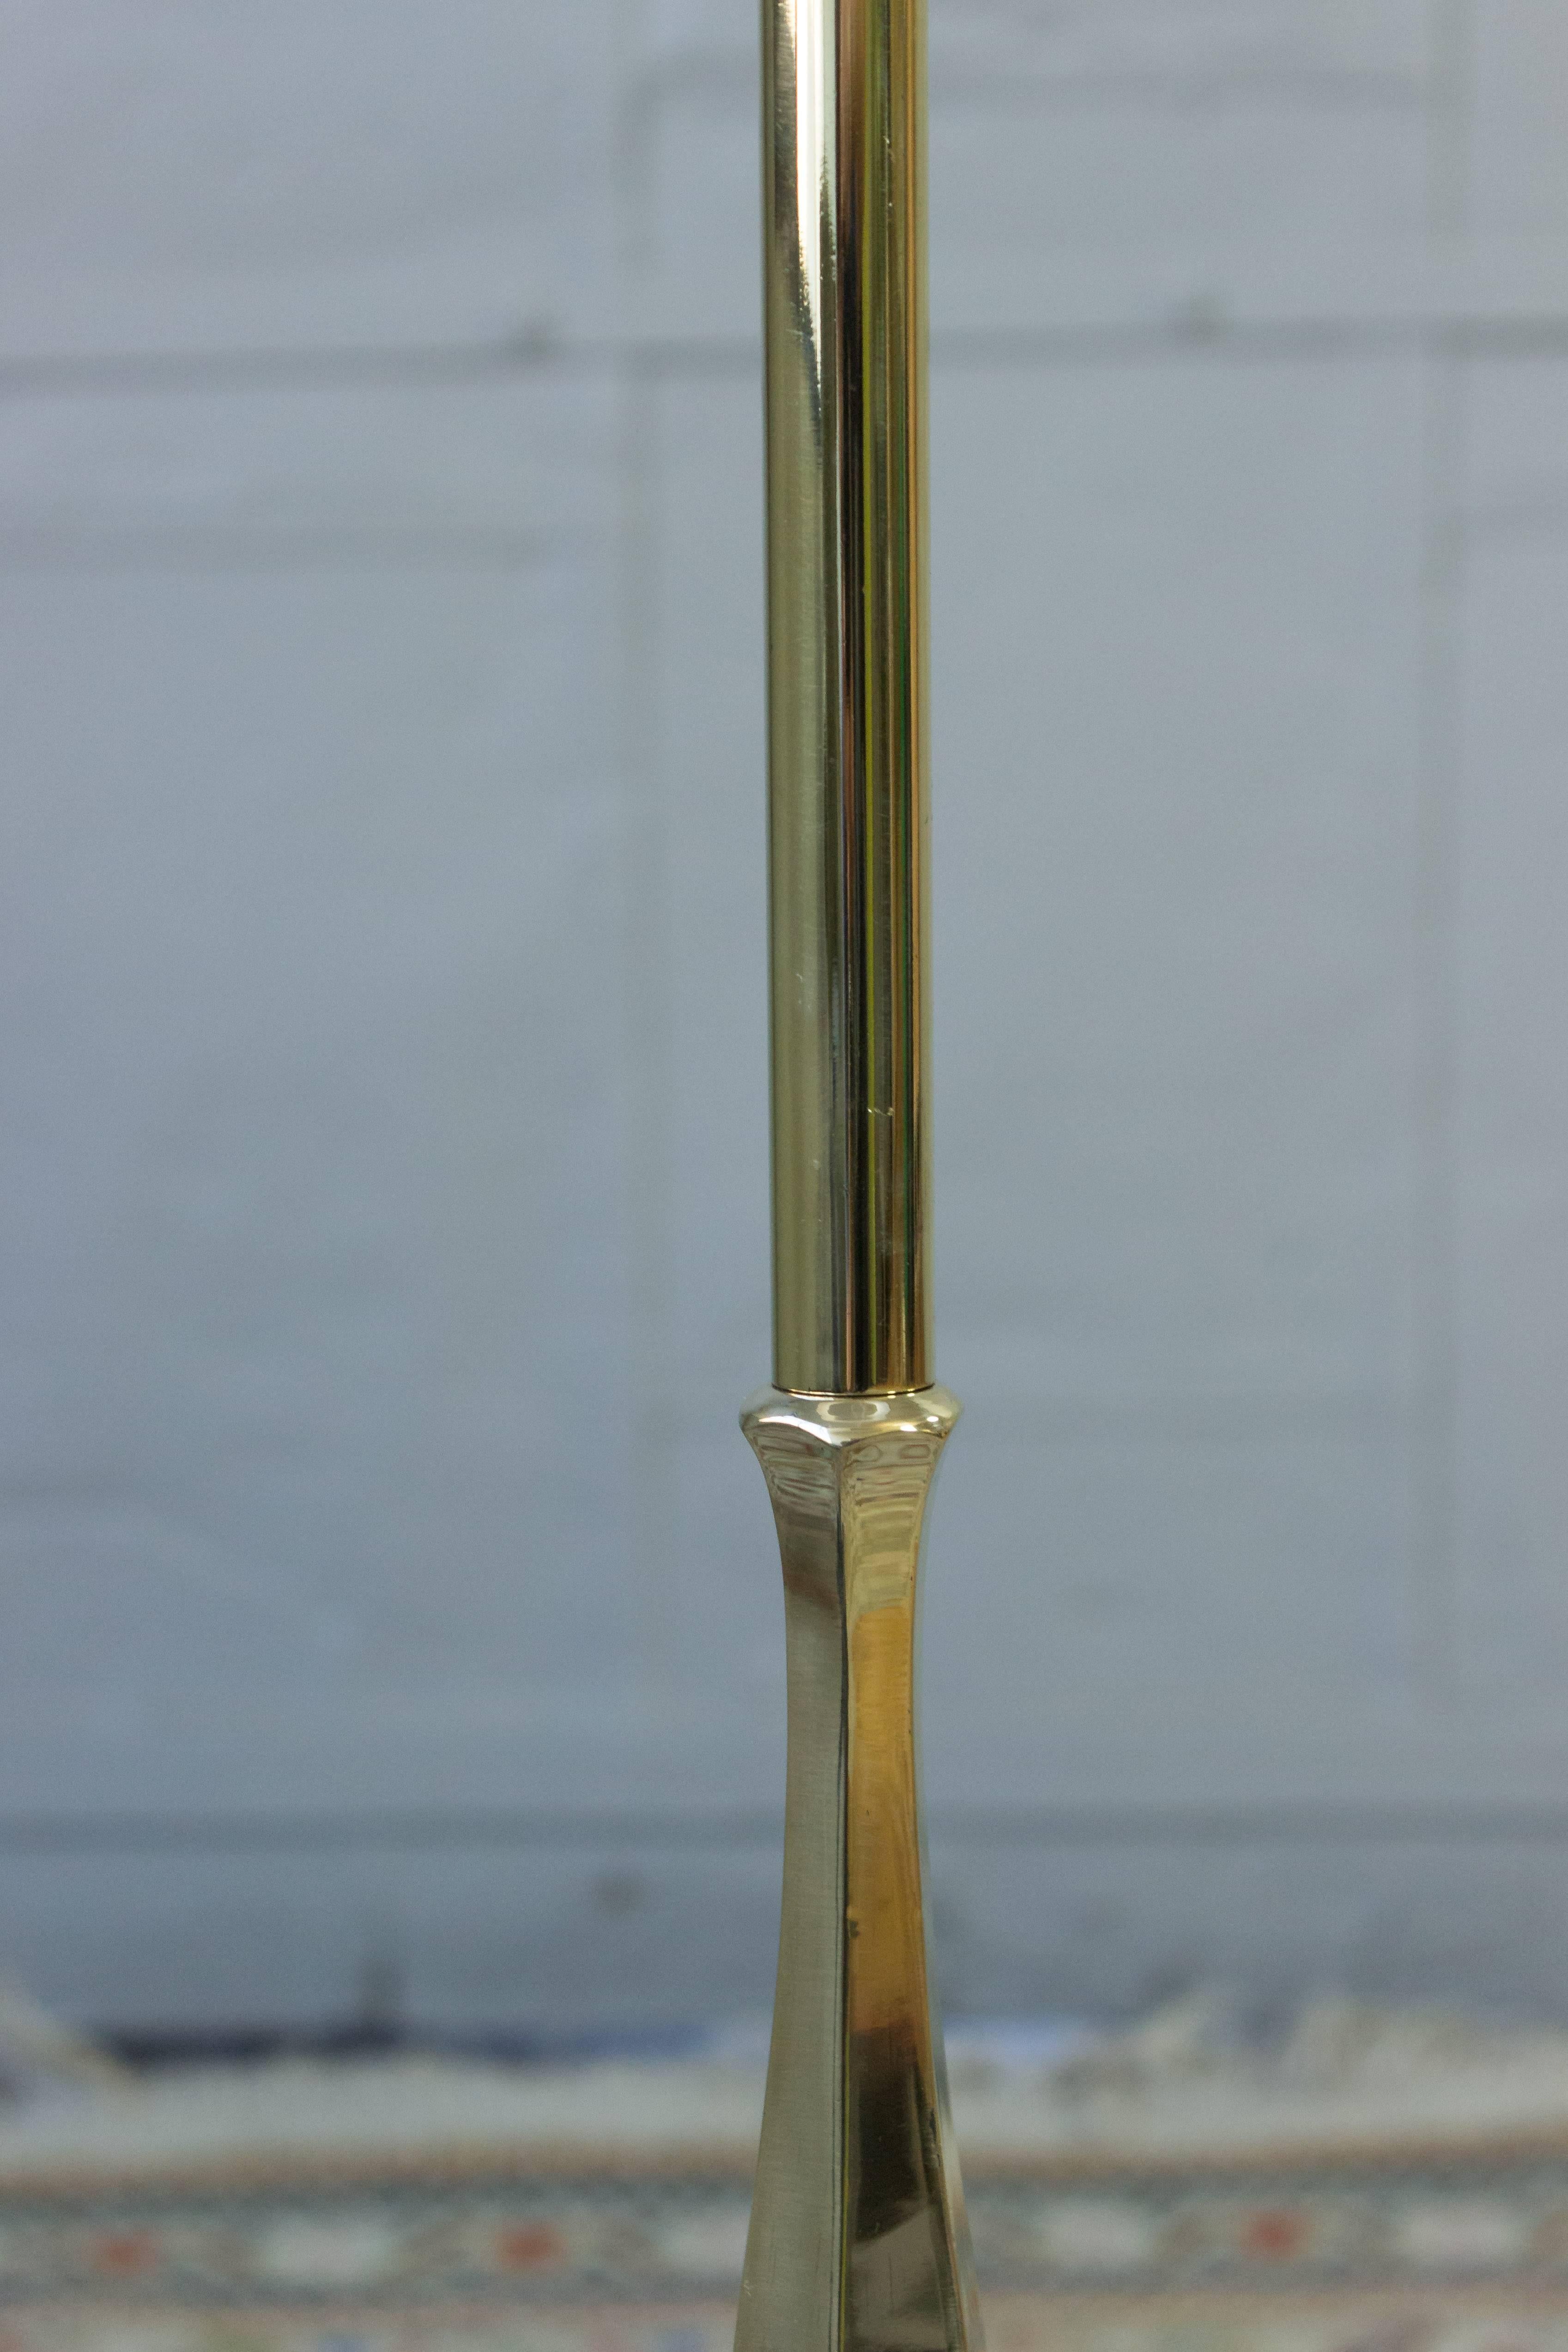 Mid-20th Century 1950s French Floor Lamp with Tripod Base in Polished Brass